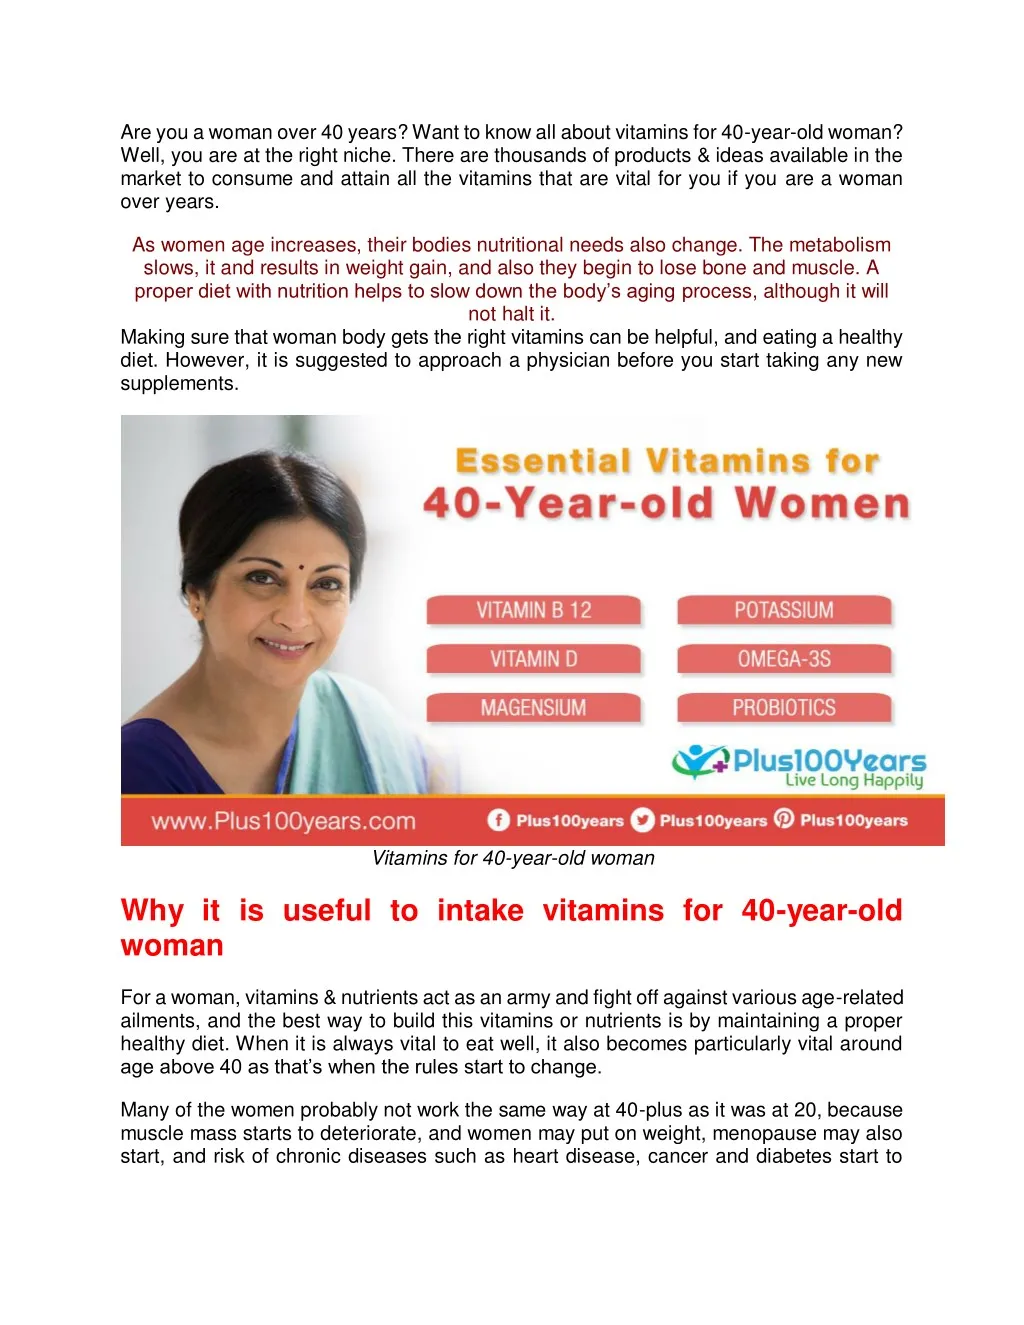 are you a woman over 40 years want to know